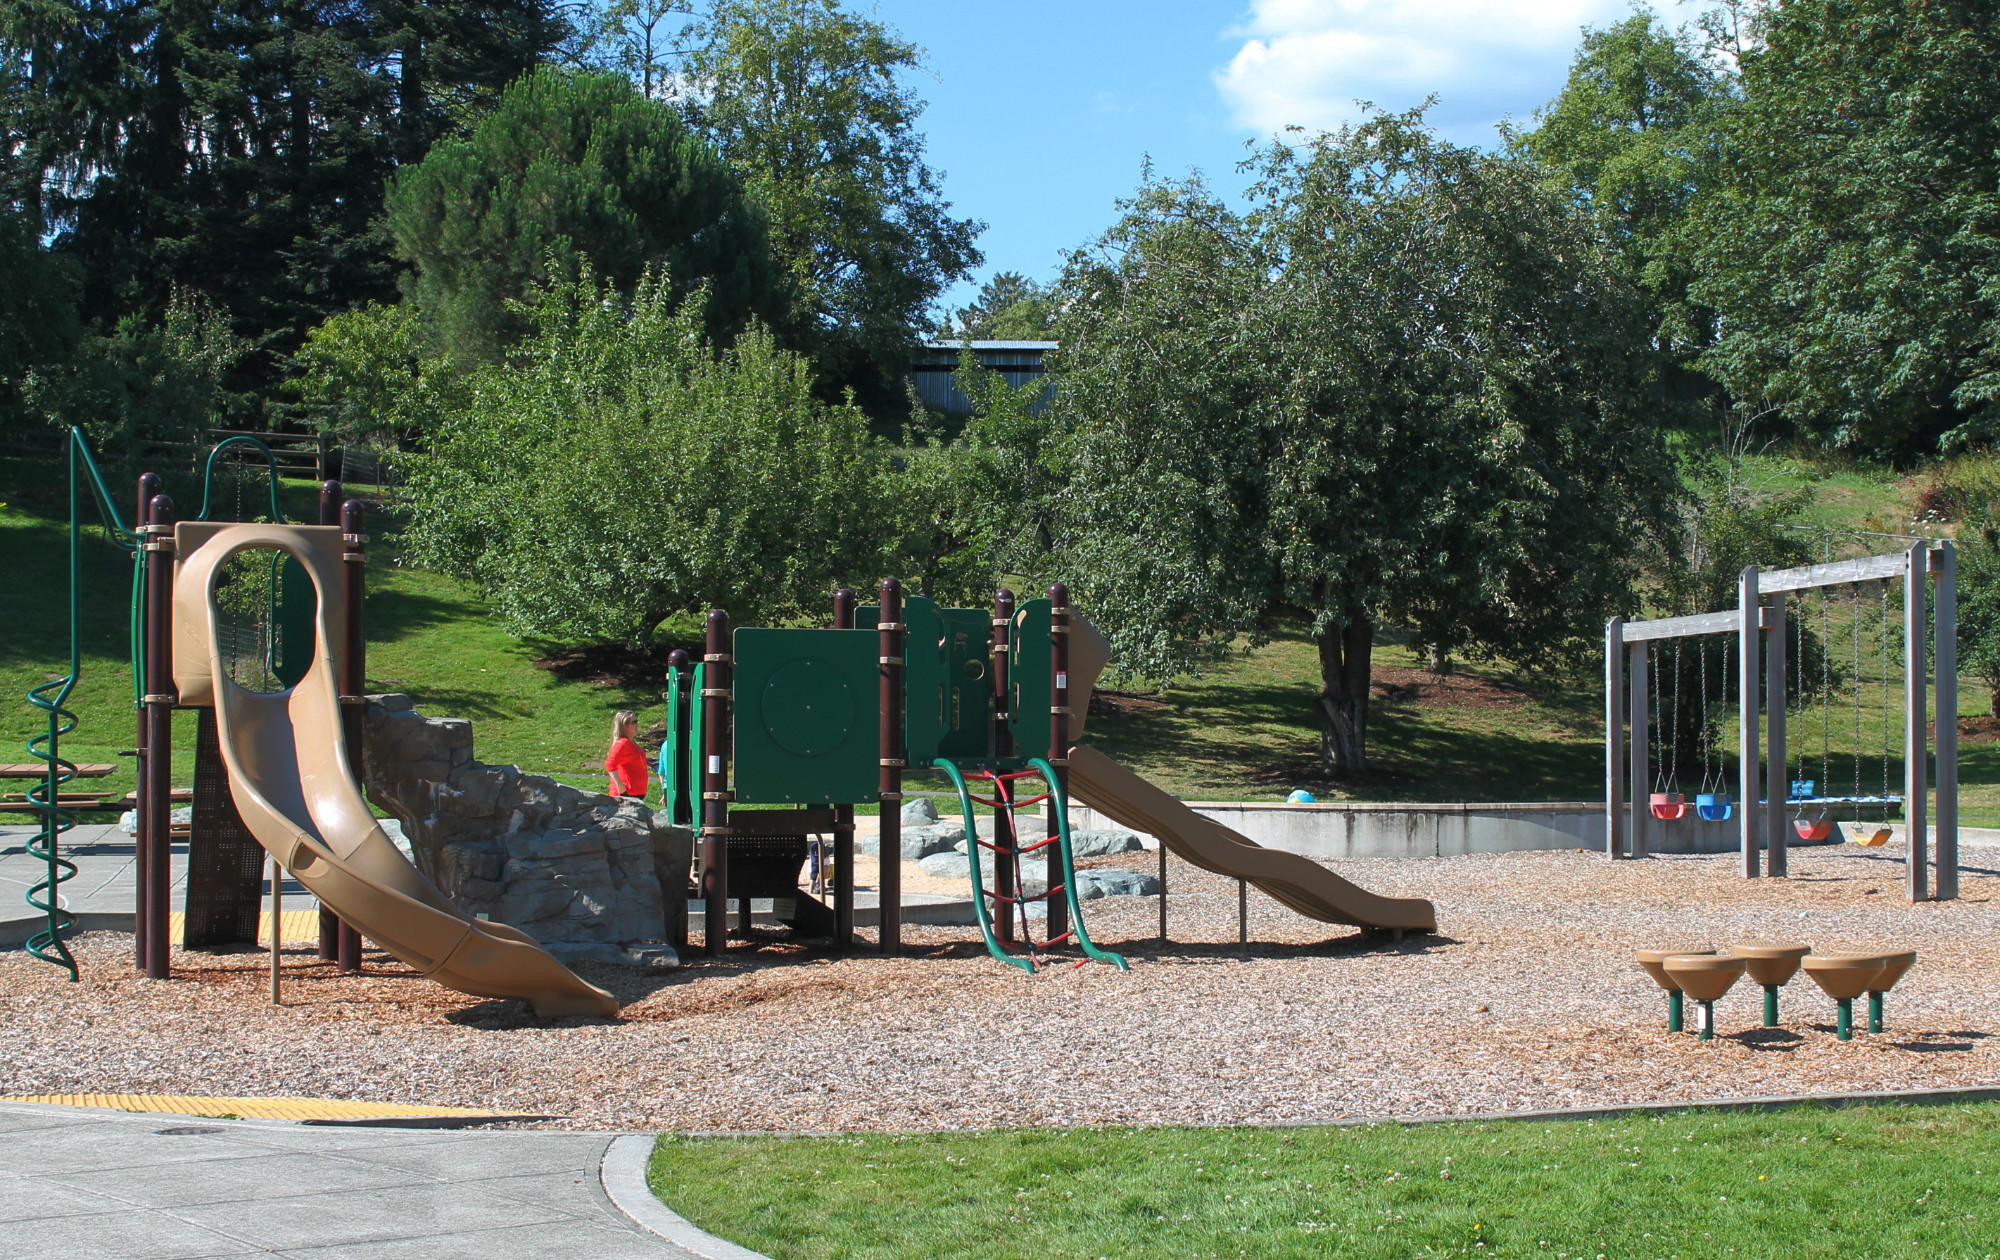 Sammamish Commons playground structure containing slides and climbing bars. A swing set is close by.